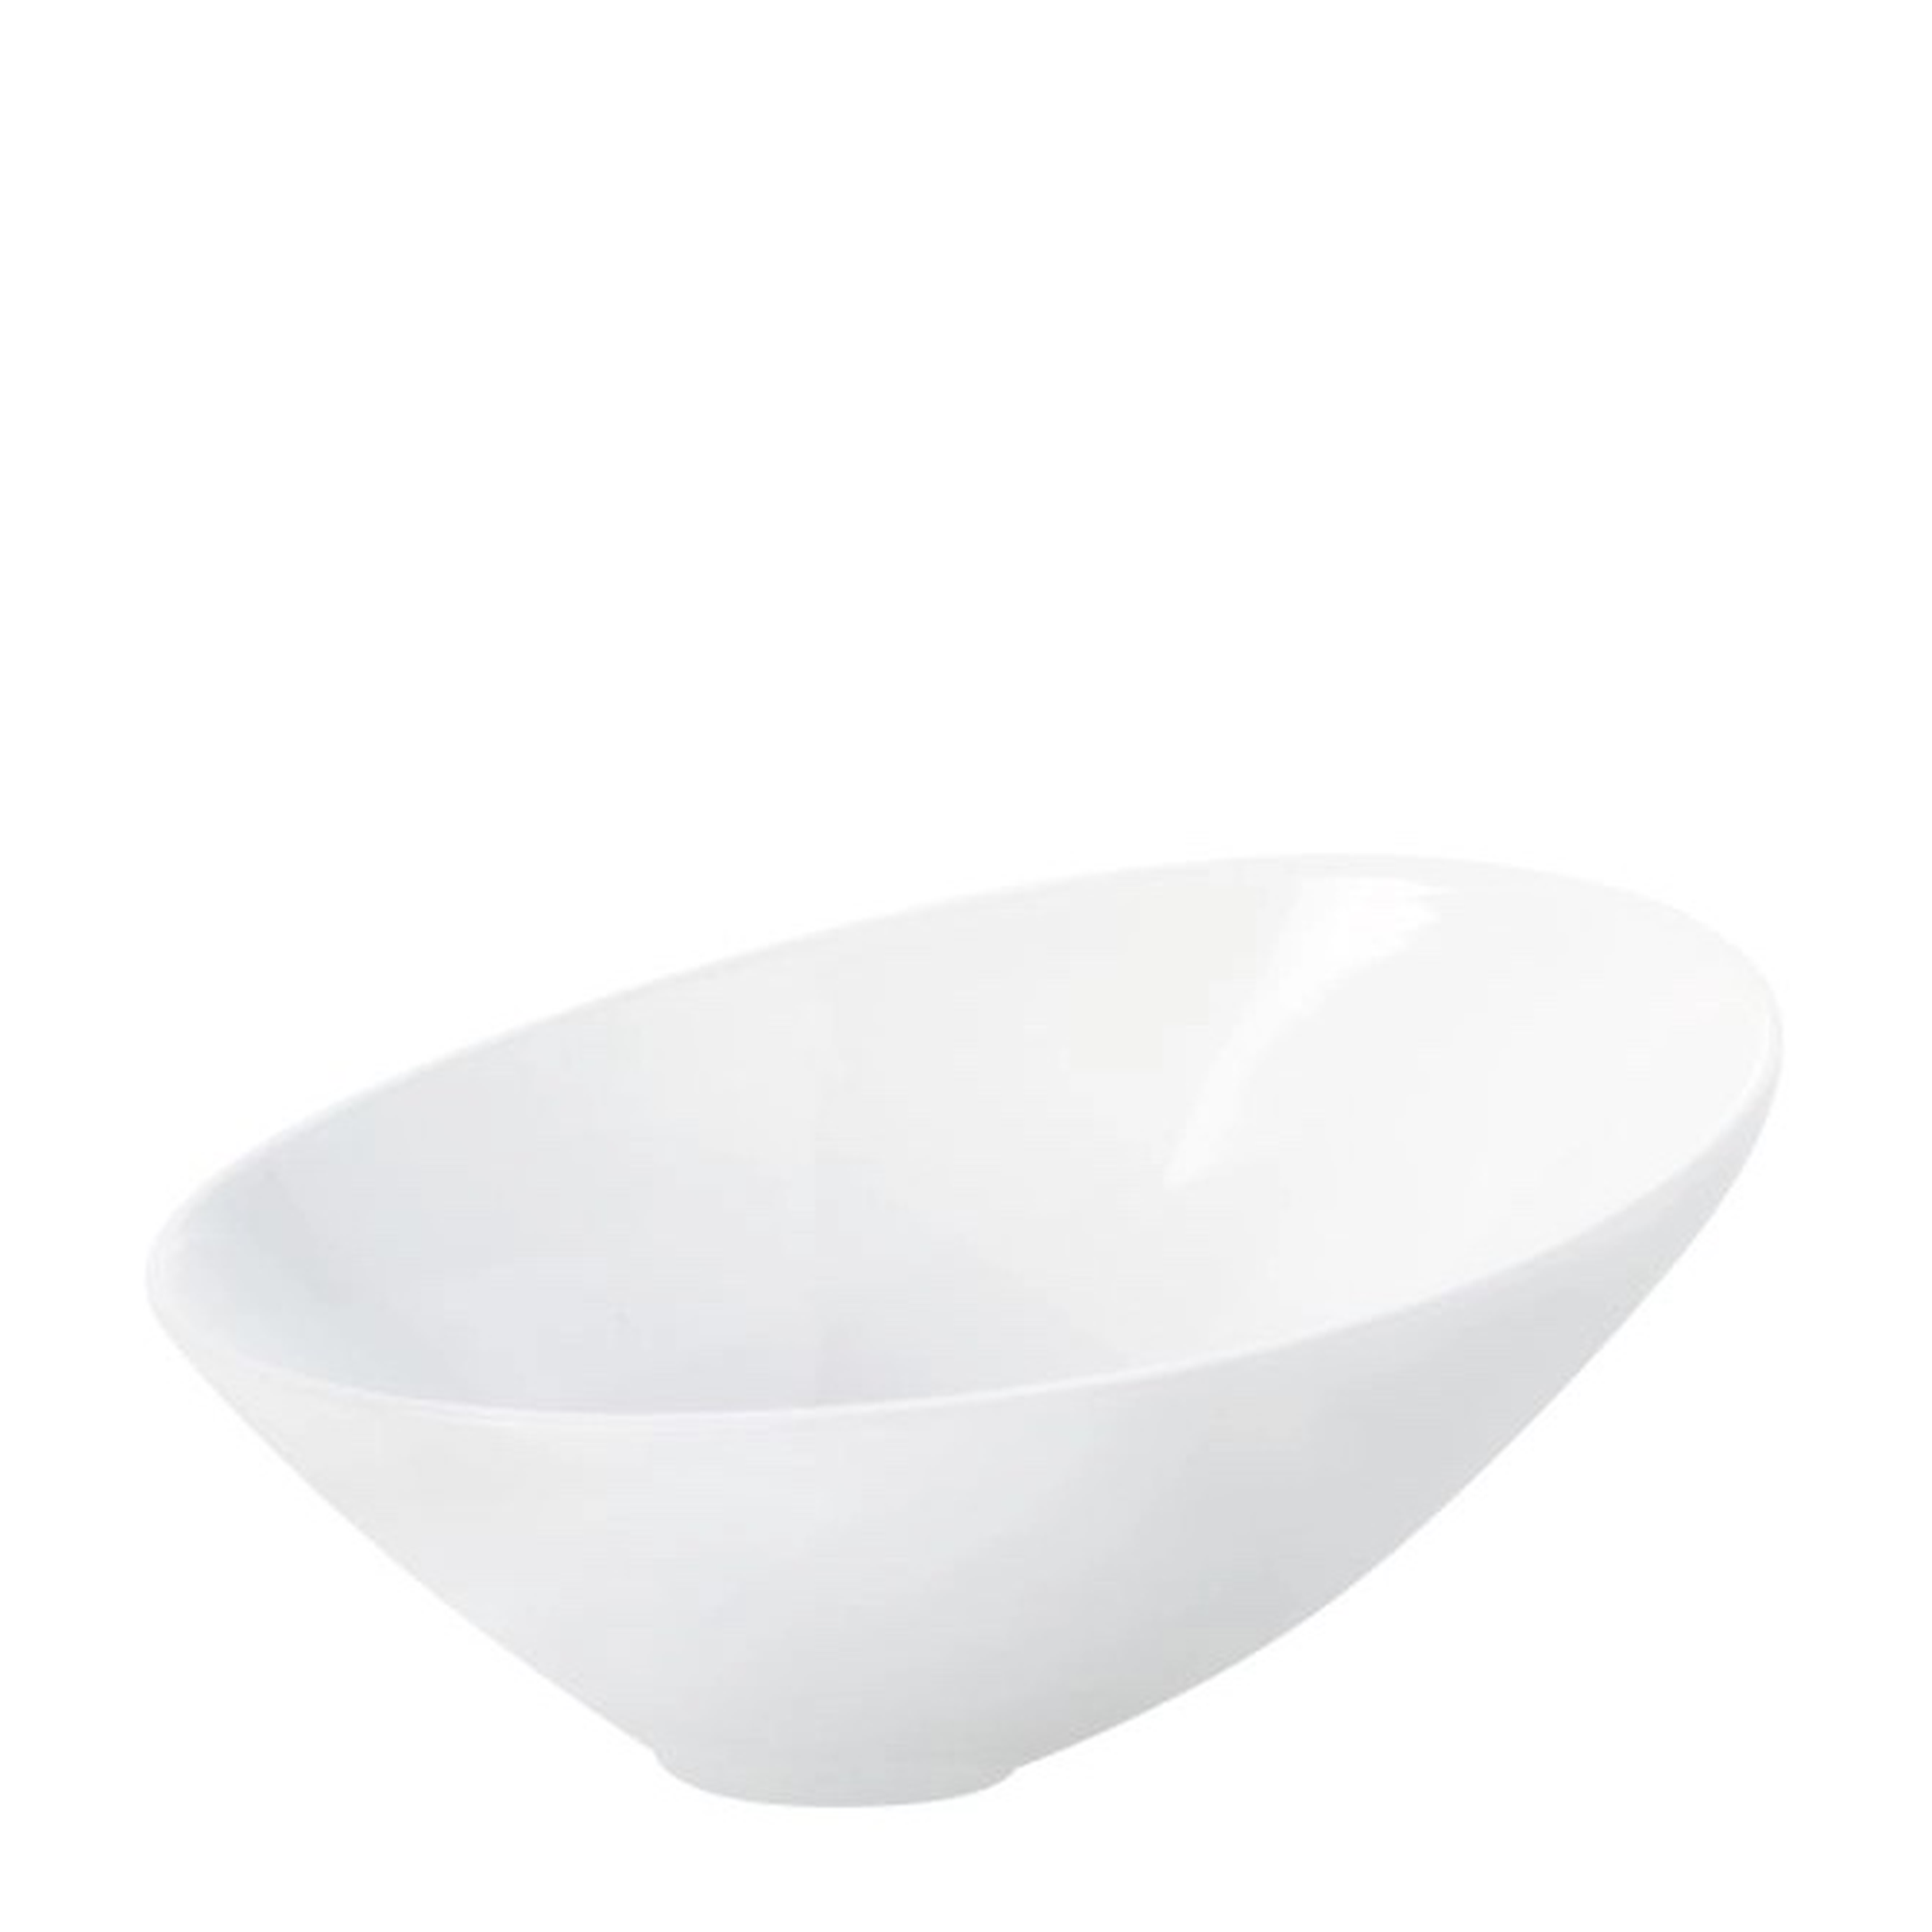 Small Vongole Asymmetric Porcelain Bowl, perfect for serving appetizers, desserts, or small portions with a unique, stylish design.